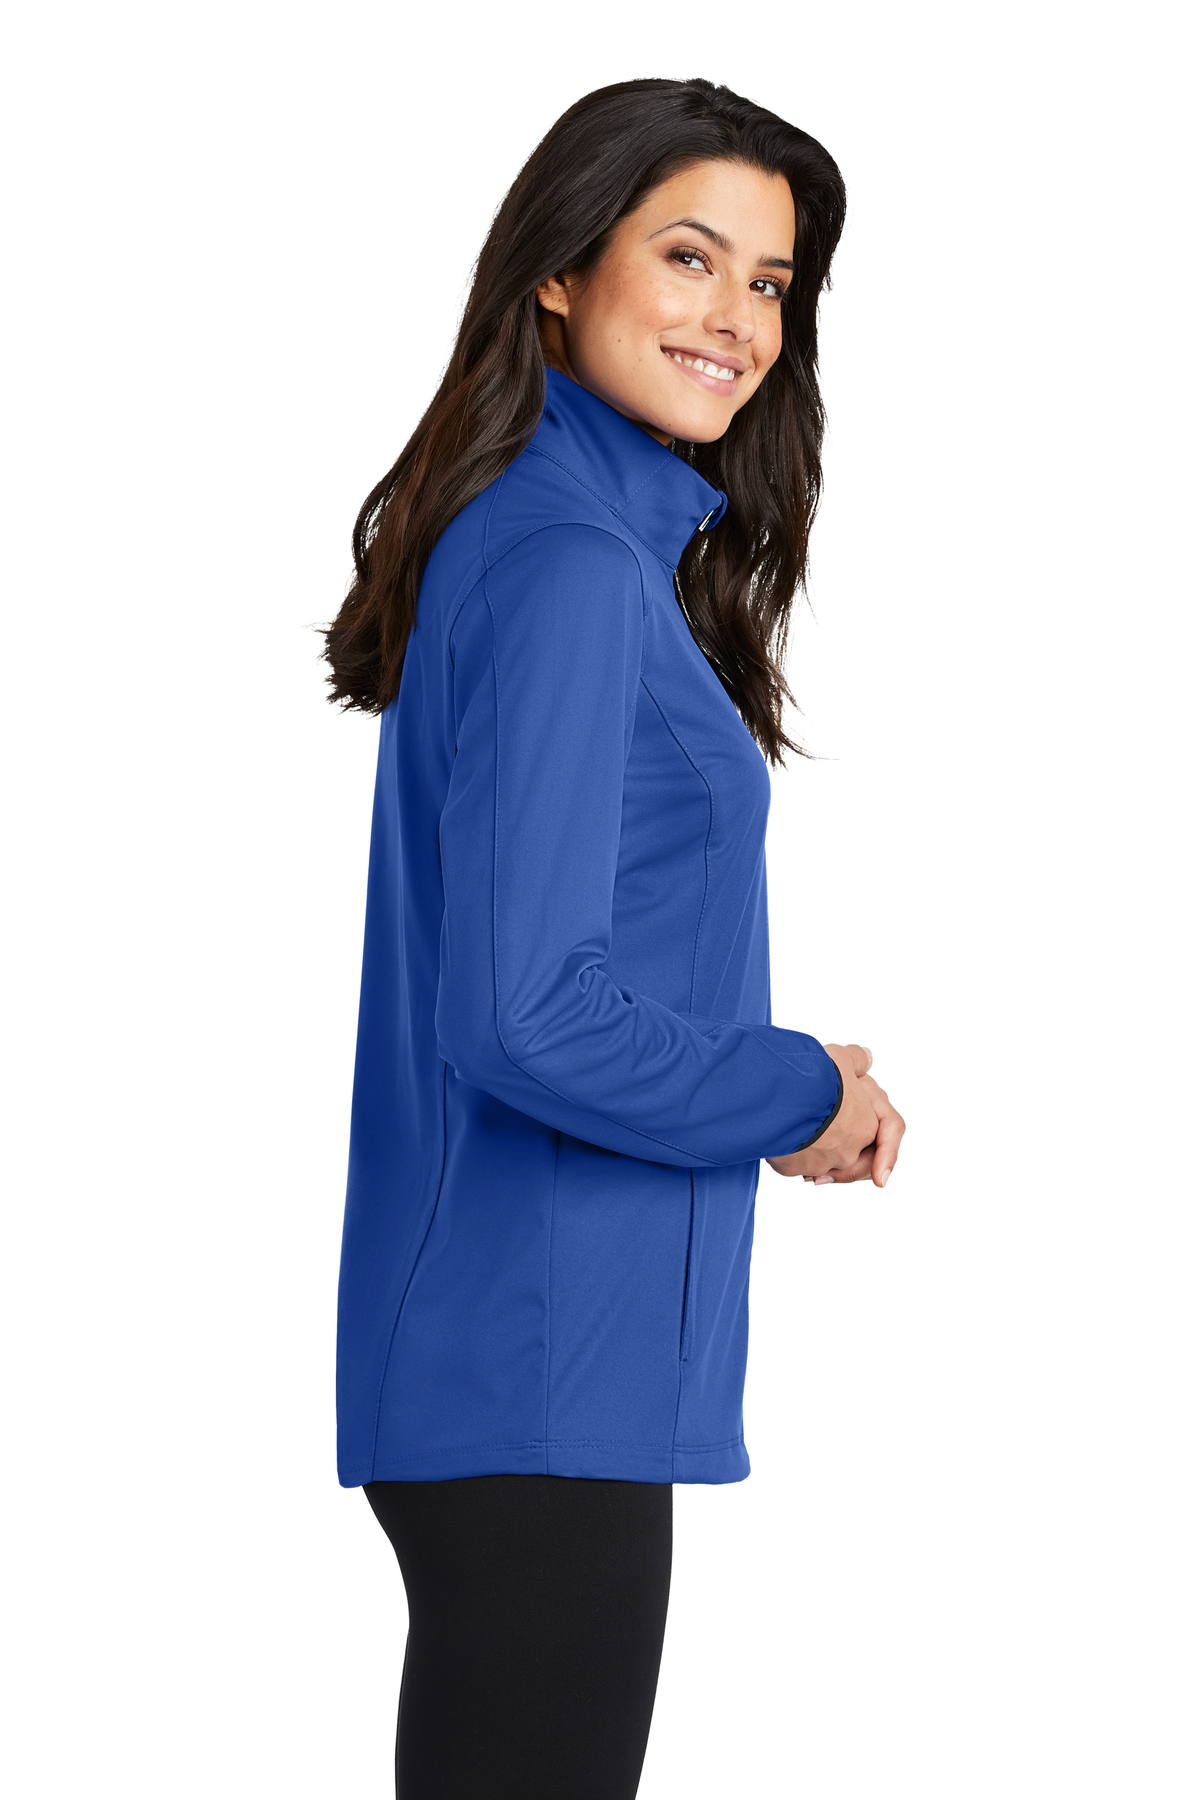 Port Authority Ladies Active Soft Shell Jacket | Product | SanMar